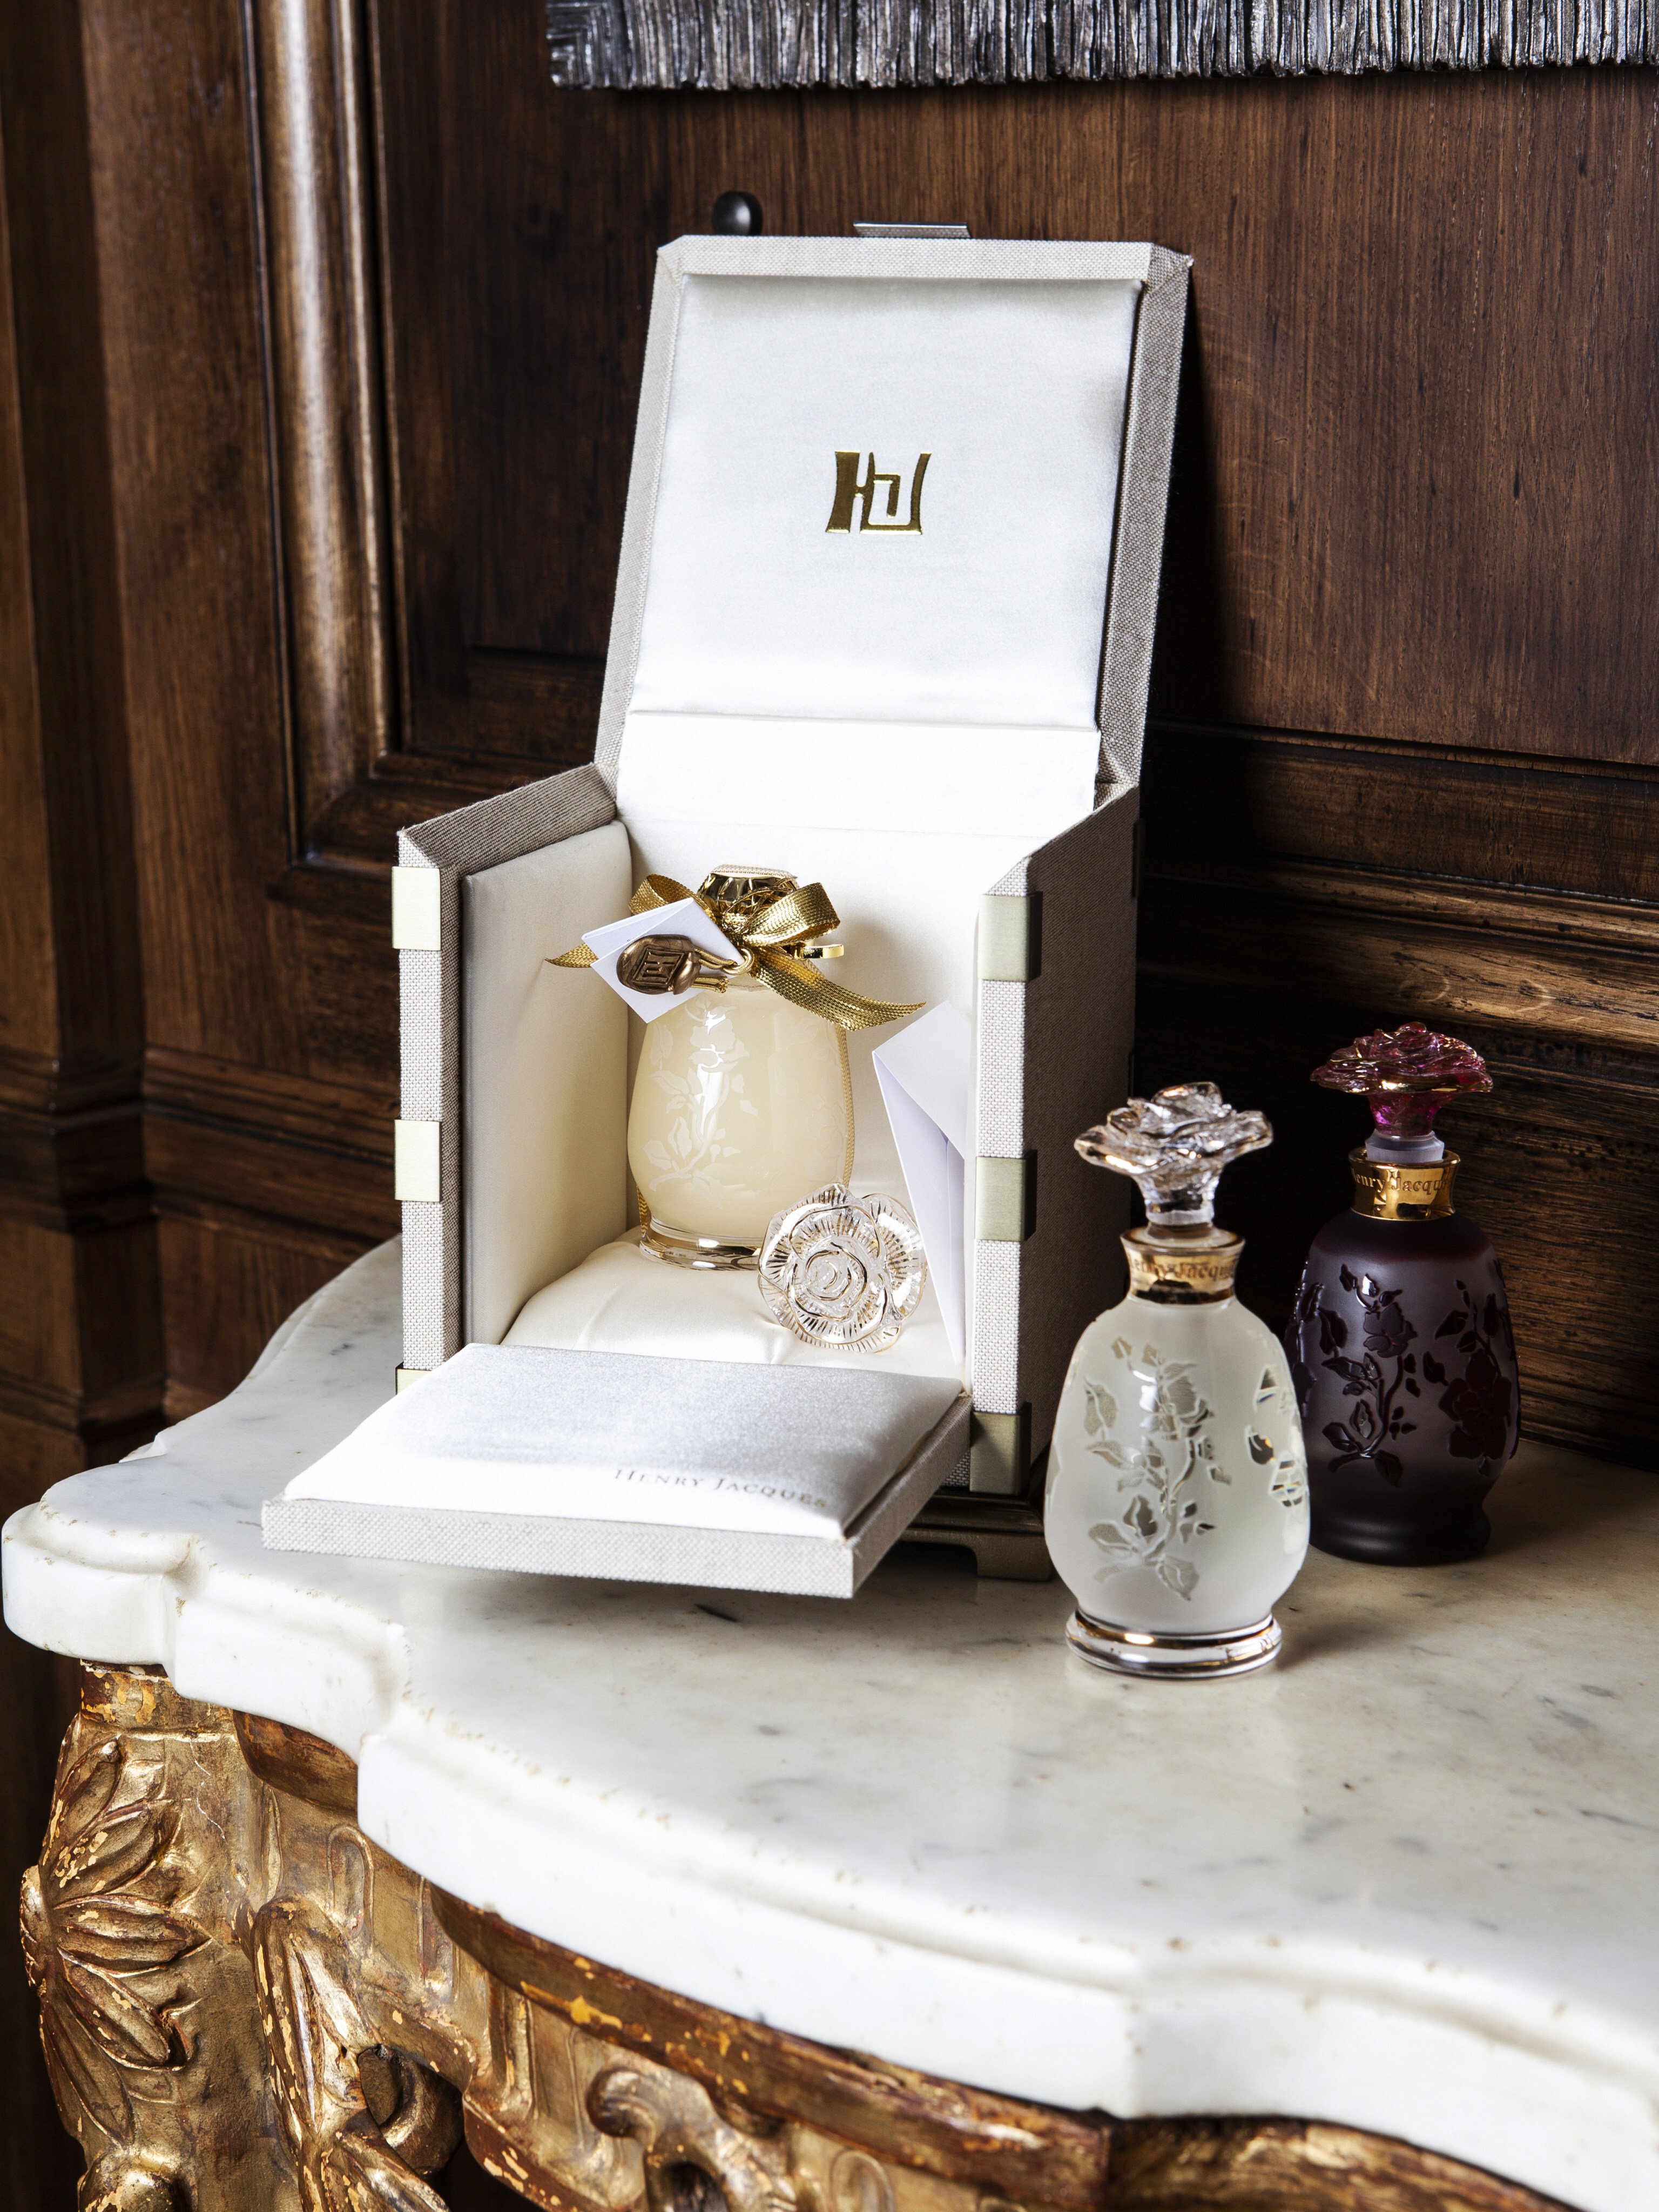 Henry Jacques’ limited edition Couture Collection presents fragrances in ornate flacons. Photos: Handouts